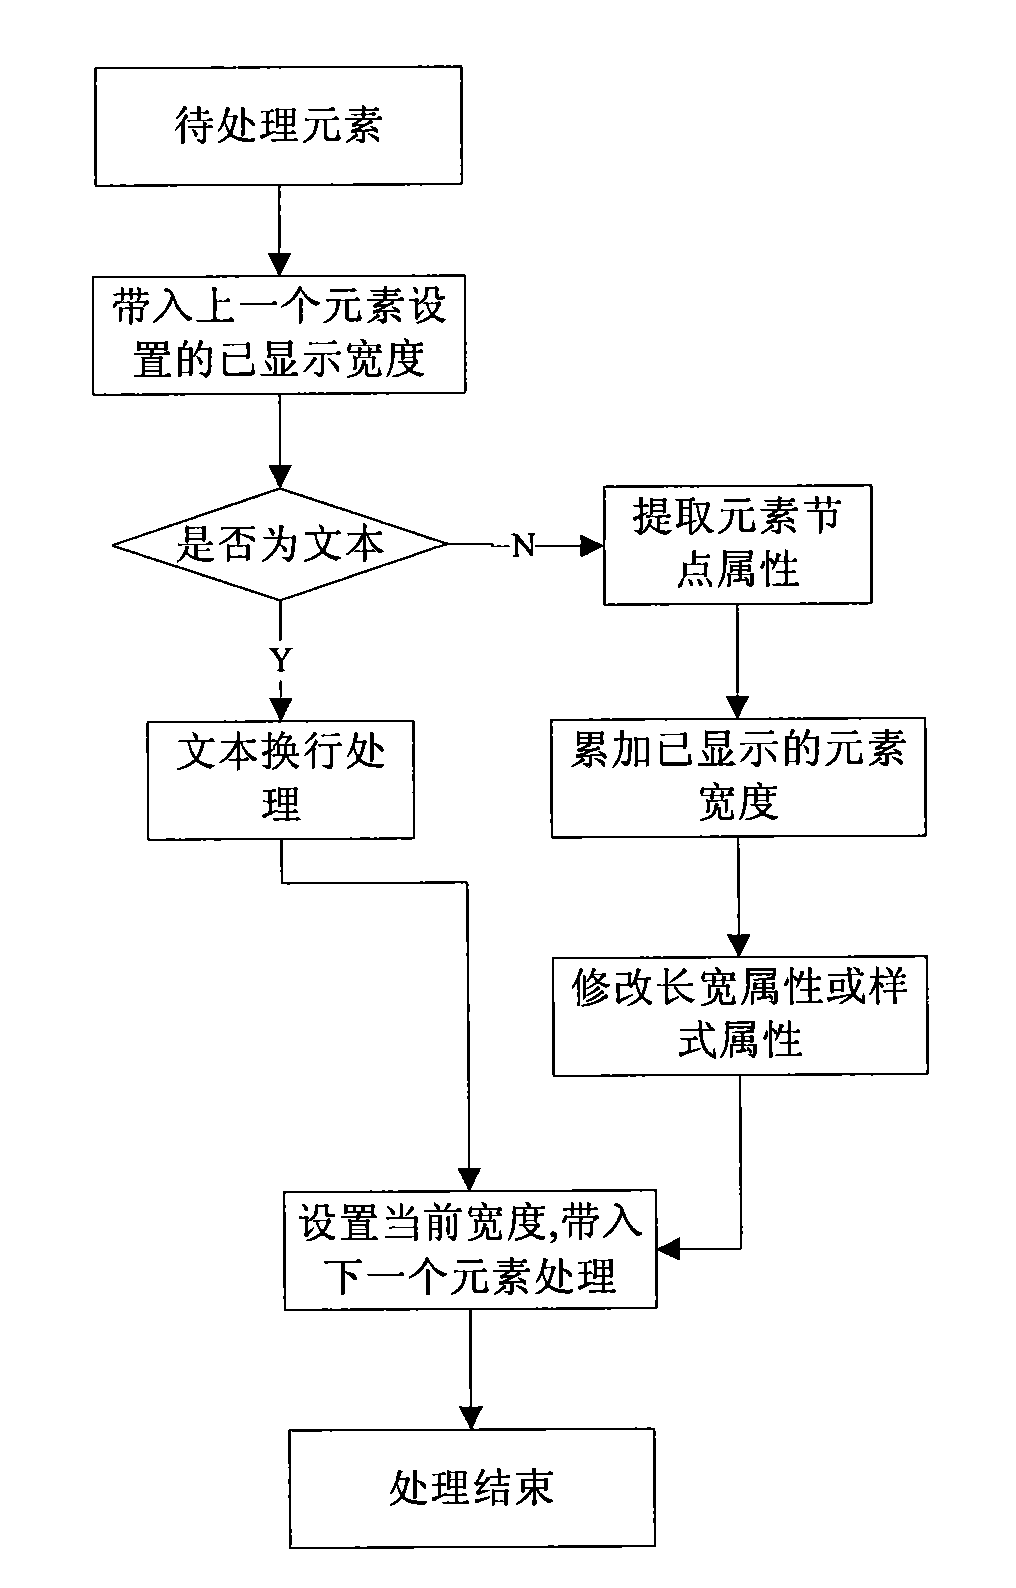 Method and device for optimizing display network page on terminal